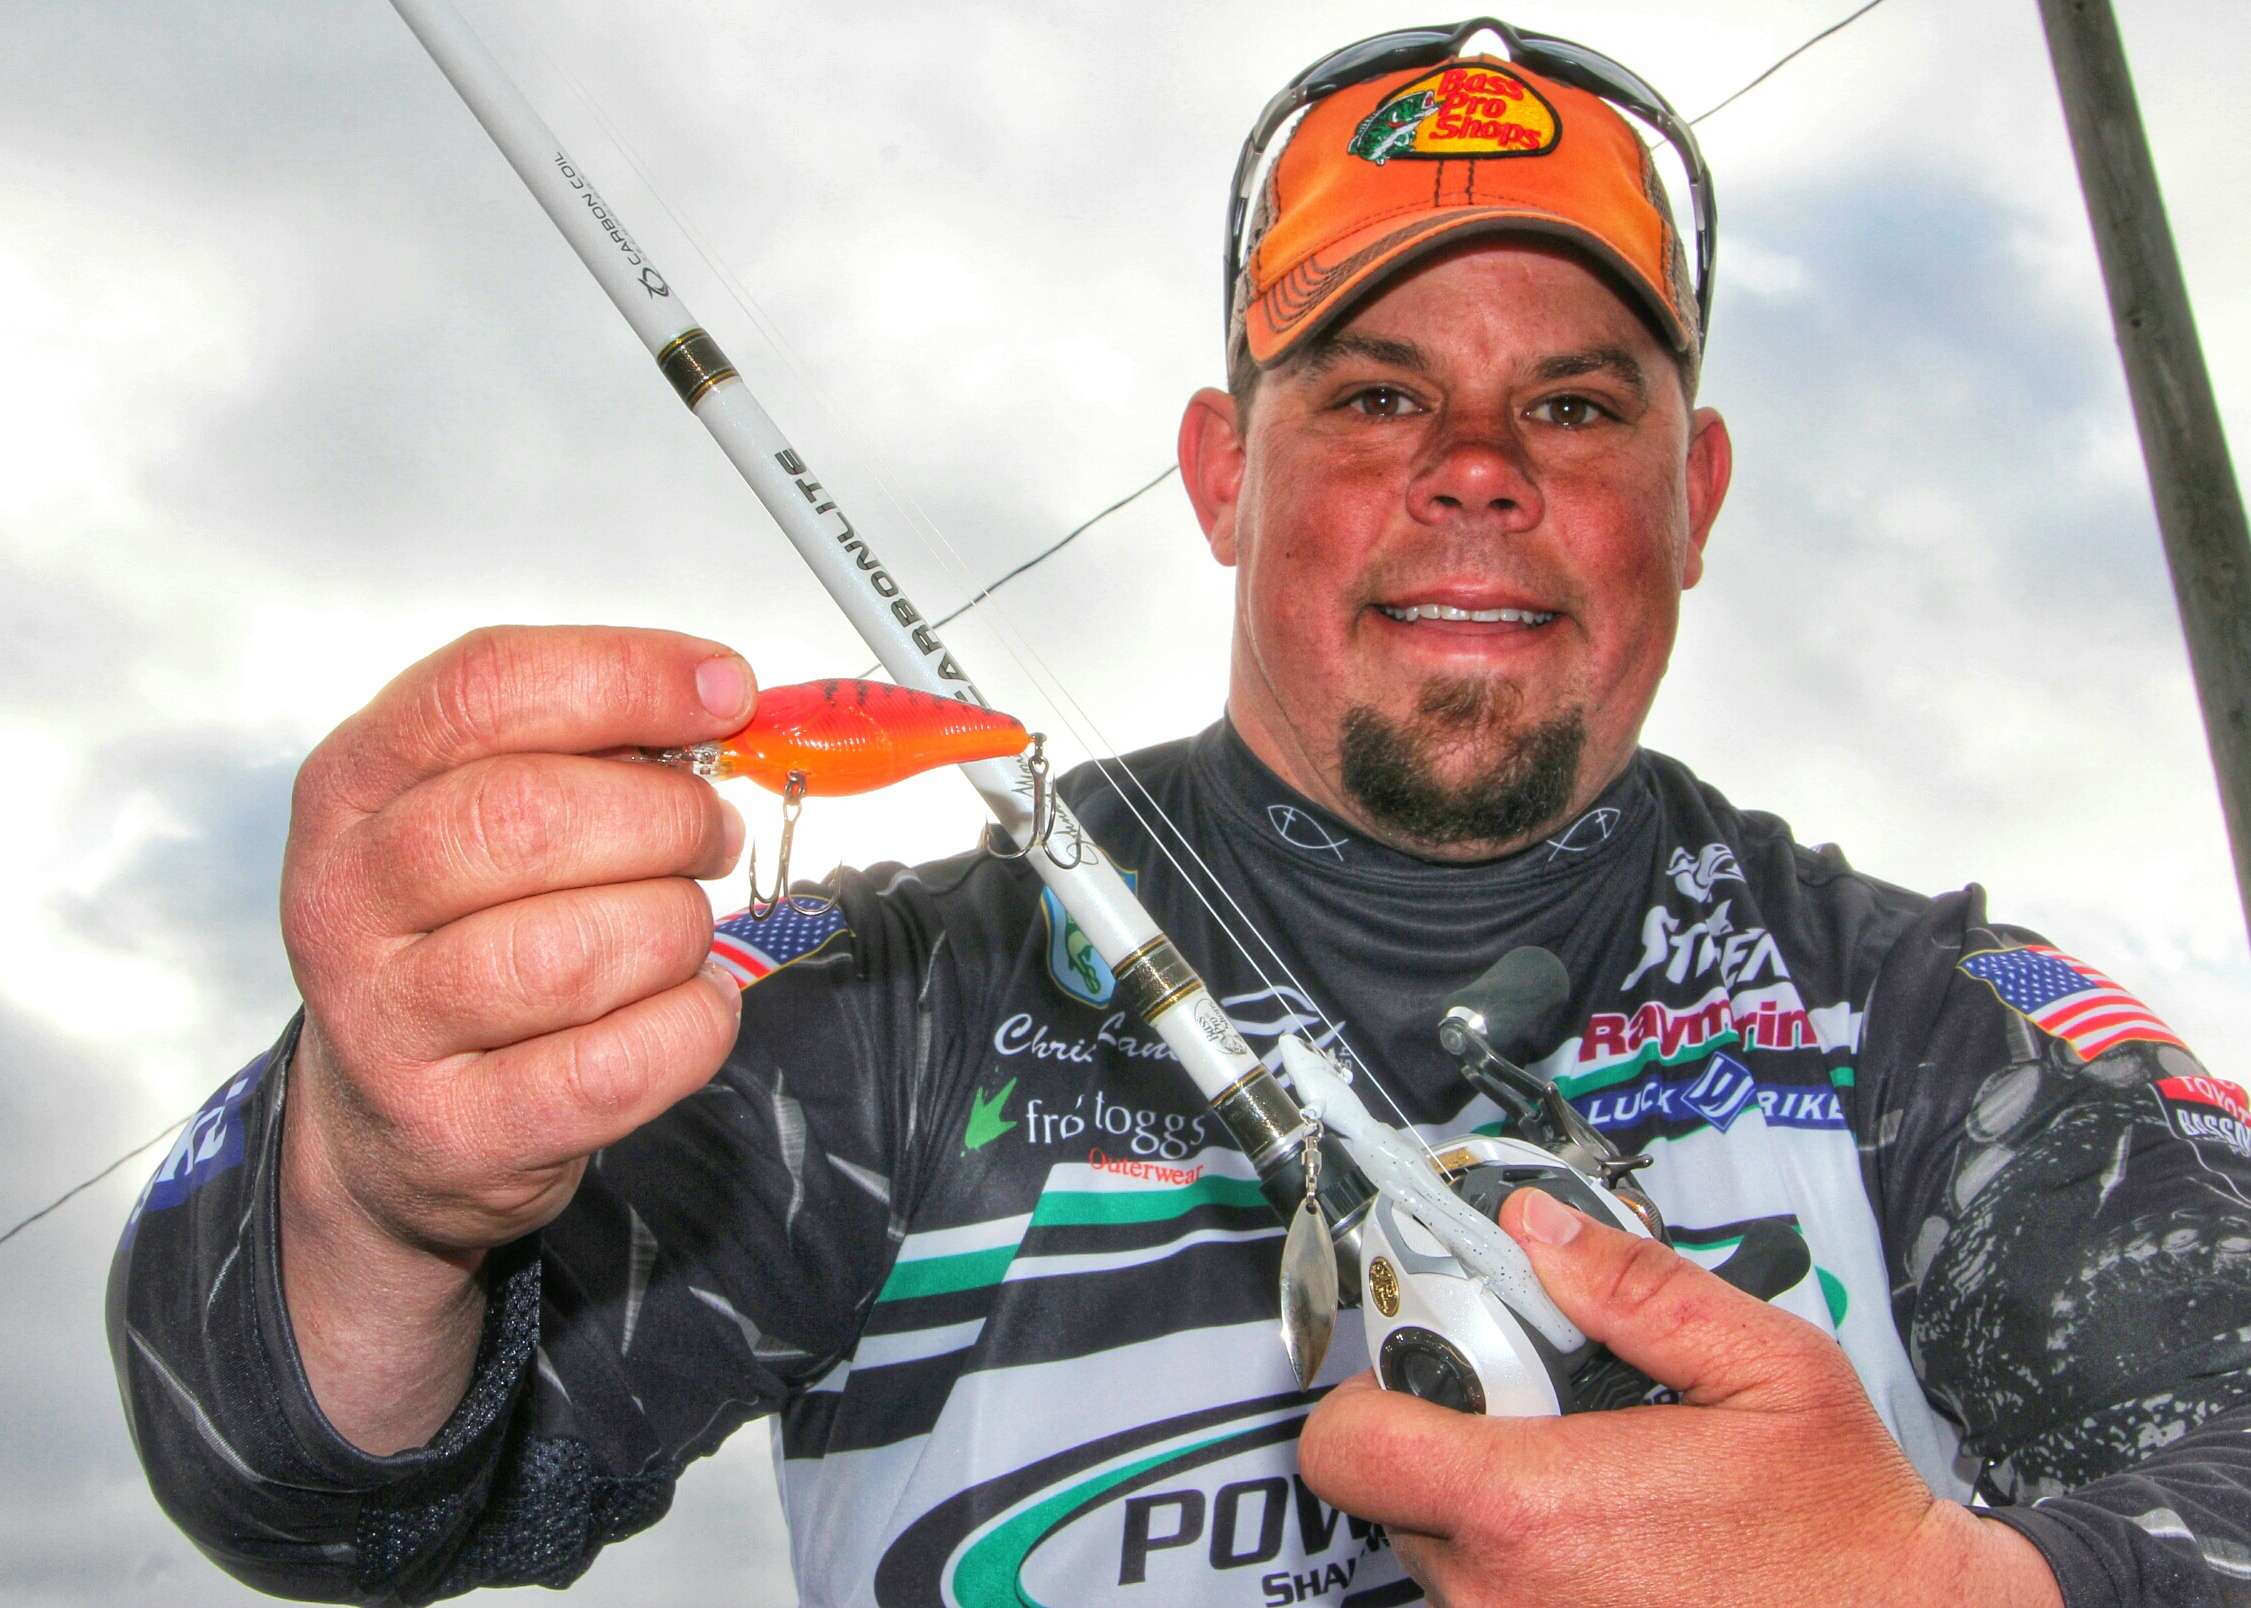 A main lake ditch (in 19 feet) with rocks was Chris Lane's main spot. He fished it with 1/2- and 1-oz horseheads tipped with a soft jerkbait, and a Luck-E-Strike American Series crankbait (red crawdad).